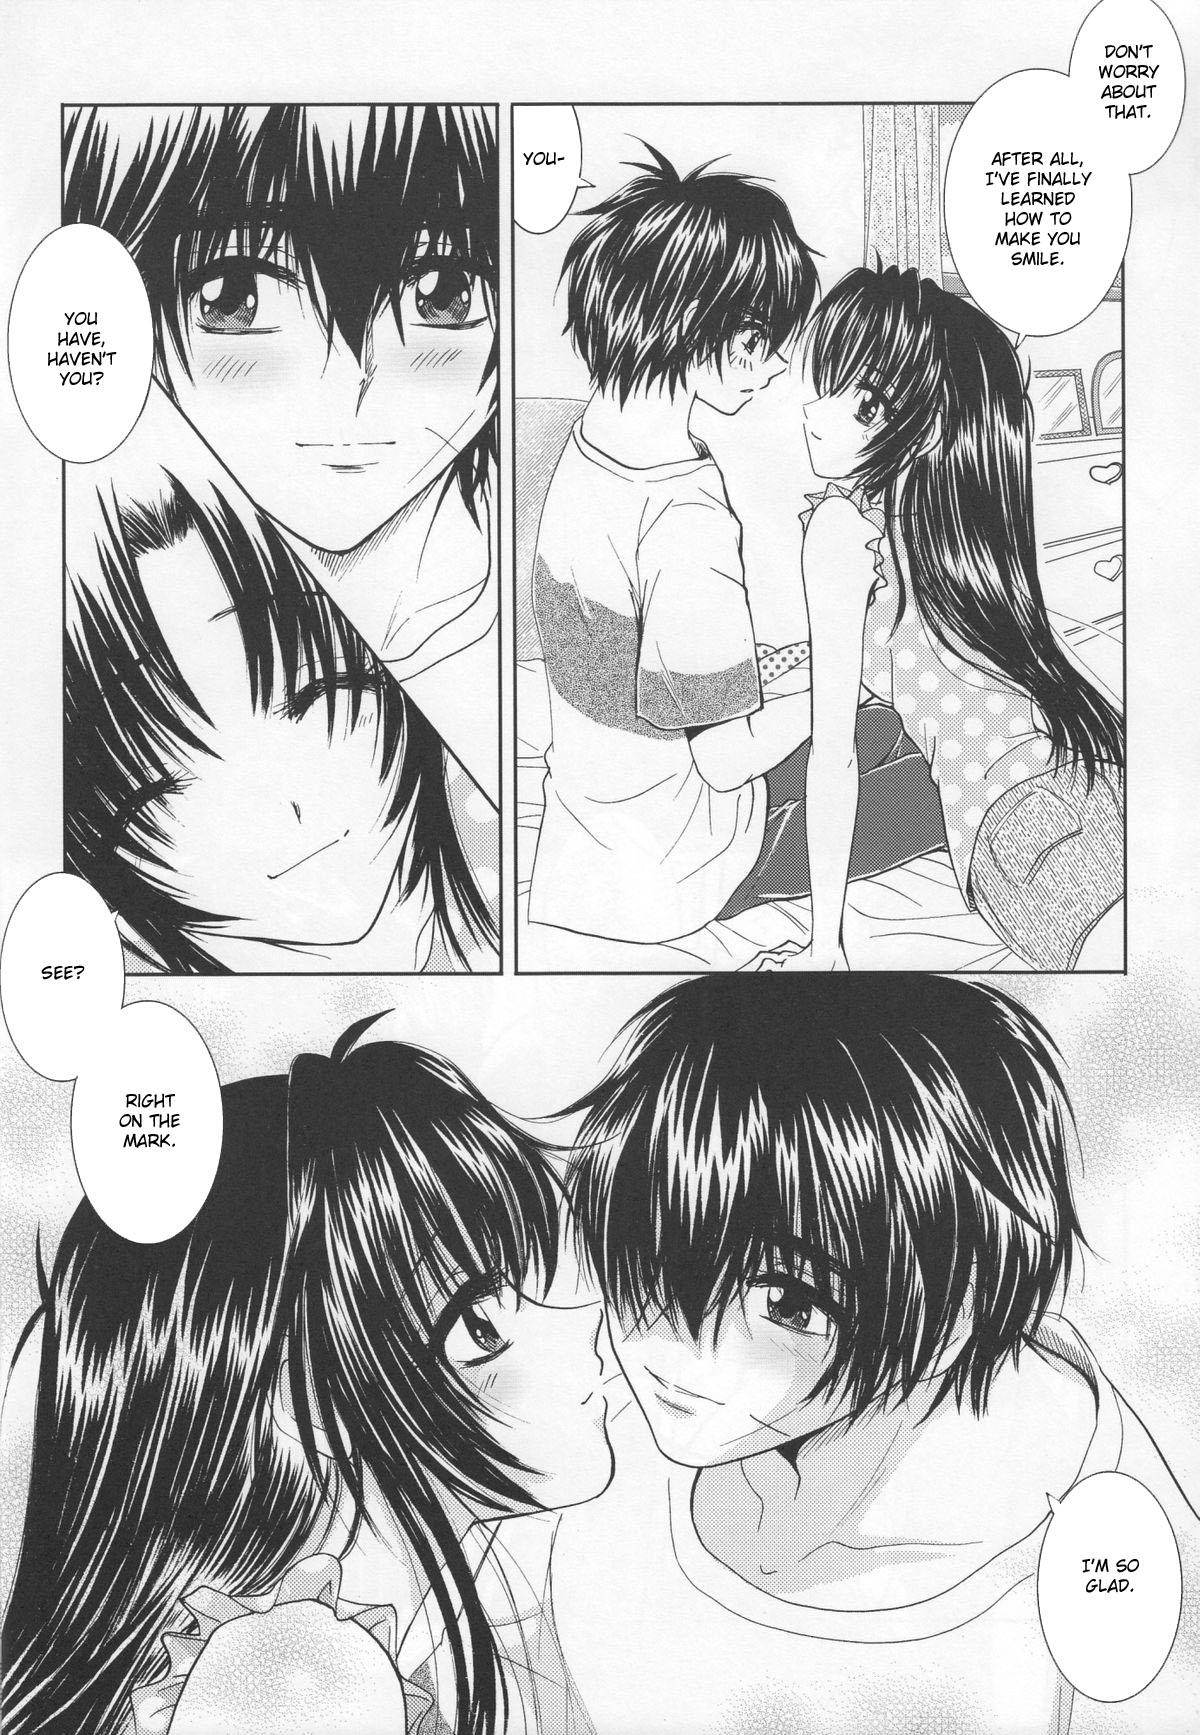 Defloration SEXY PANIC Yappari Sei ga Ichiban!? | Sexy Panic: Their First Time is Without Protection!? - Full metal panic Les - Page 7